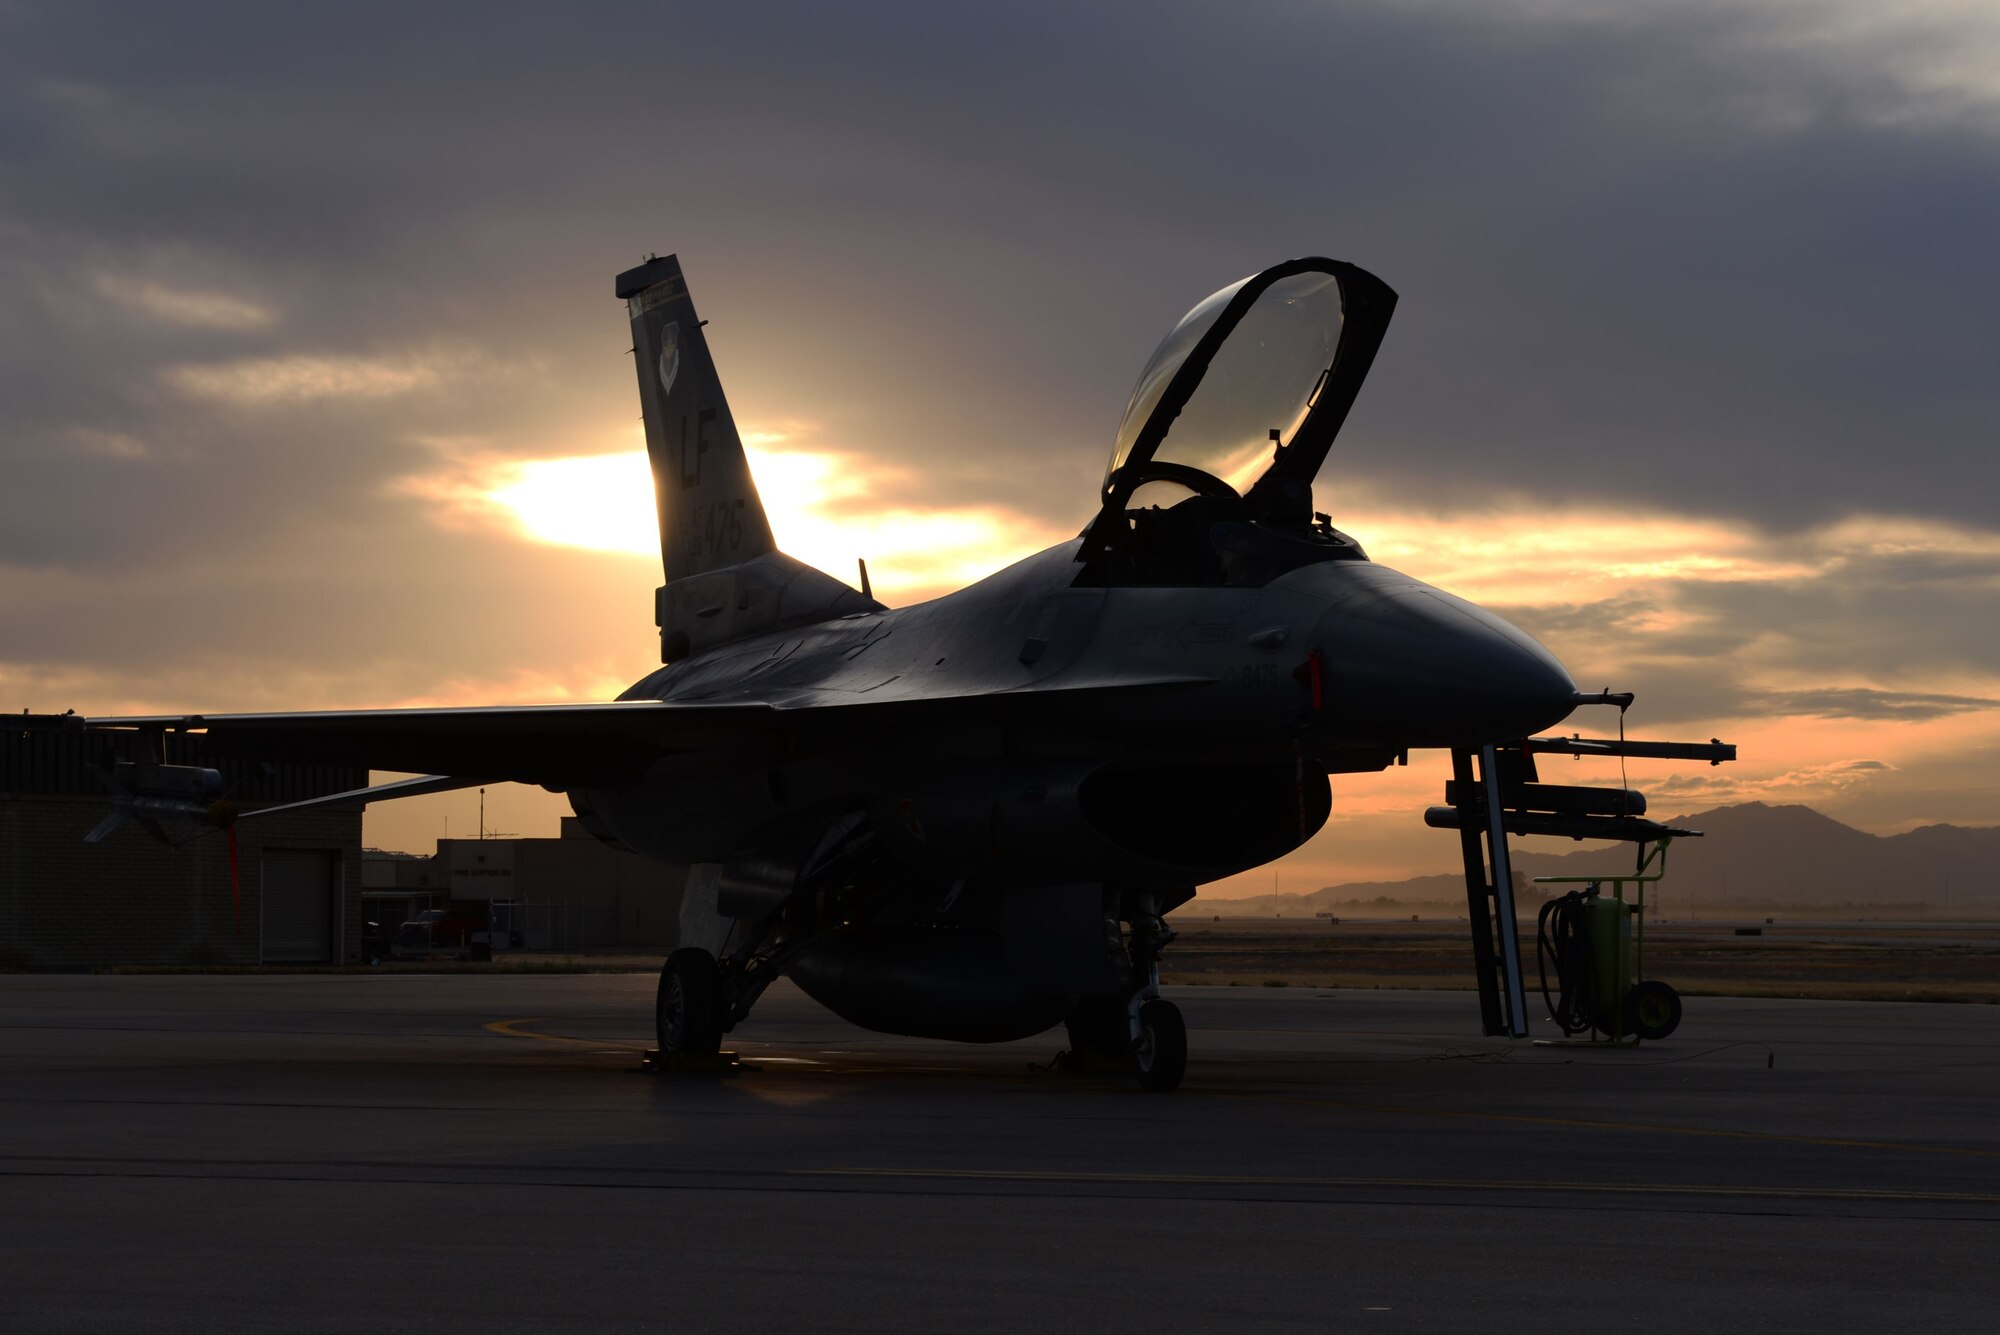 An F-16 Fighting Falcon assigned to the 310th Fighter Squadron sits on the flight line at Luke Air Force Base, Ariz., Dec. 12, 2017. The 310th FS graduated their latest F-16 Basic Course class Dec. 13, and  retired Air Force pilot Lt. Col. Bob Pardo spoke at the ceremony and addressed the graduates. (U.S. Air Force photo/Senior Airman Ridge Shan)